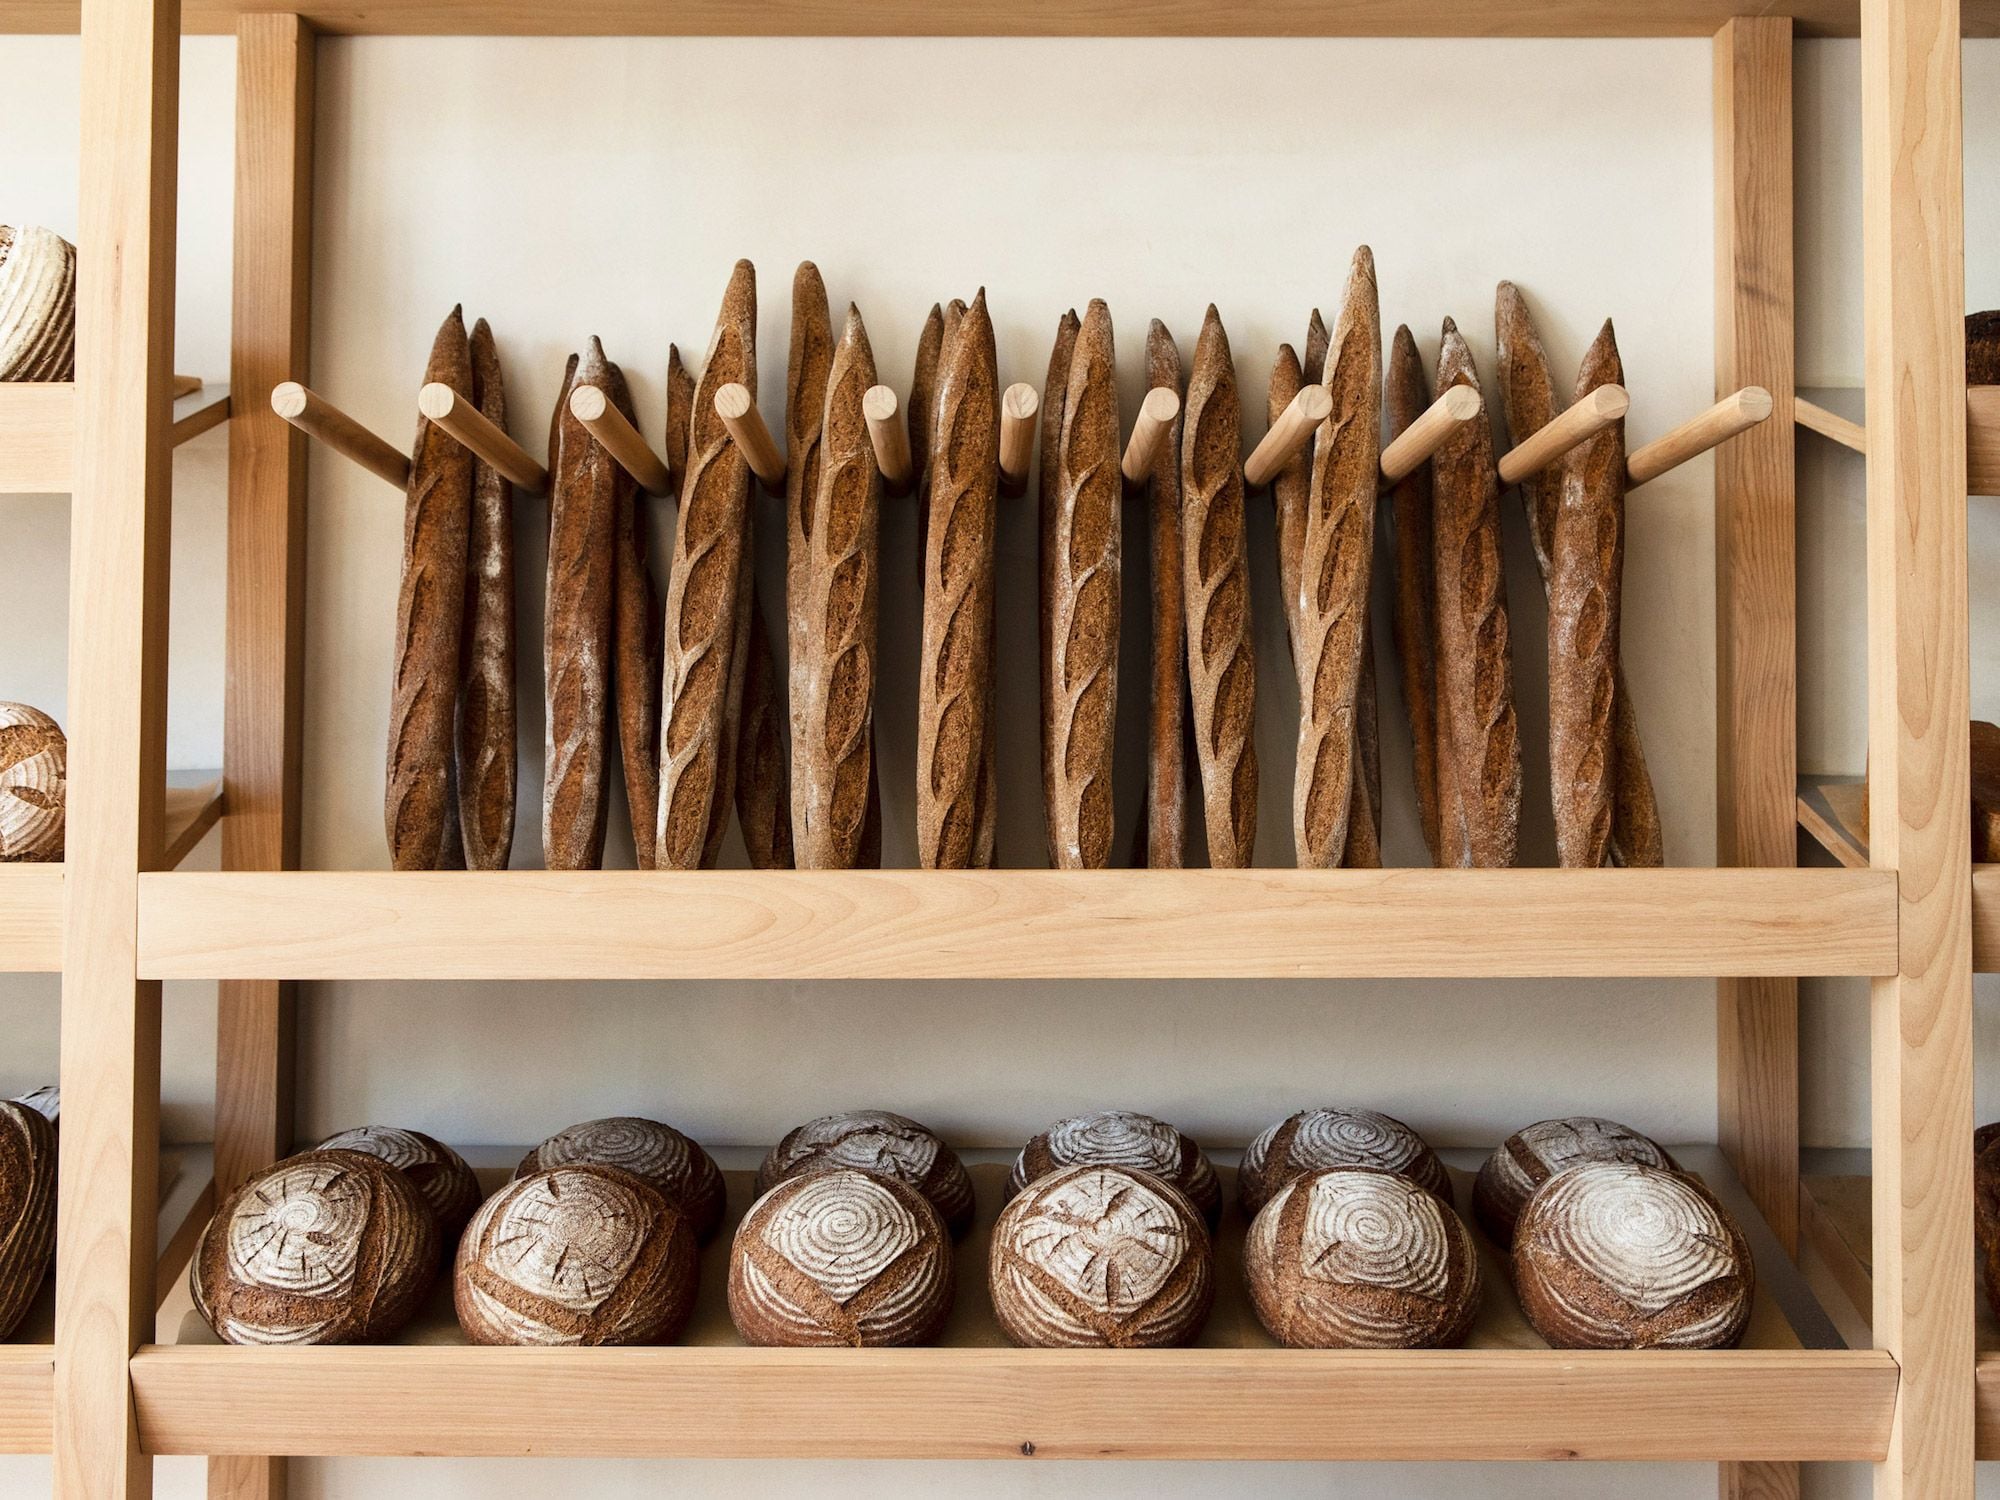 Behind the main counter at Breadblok, simple wooden elements keep inventory nice and neat.